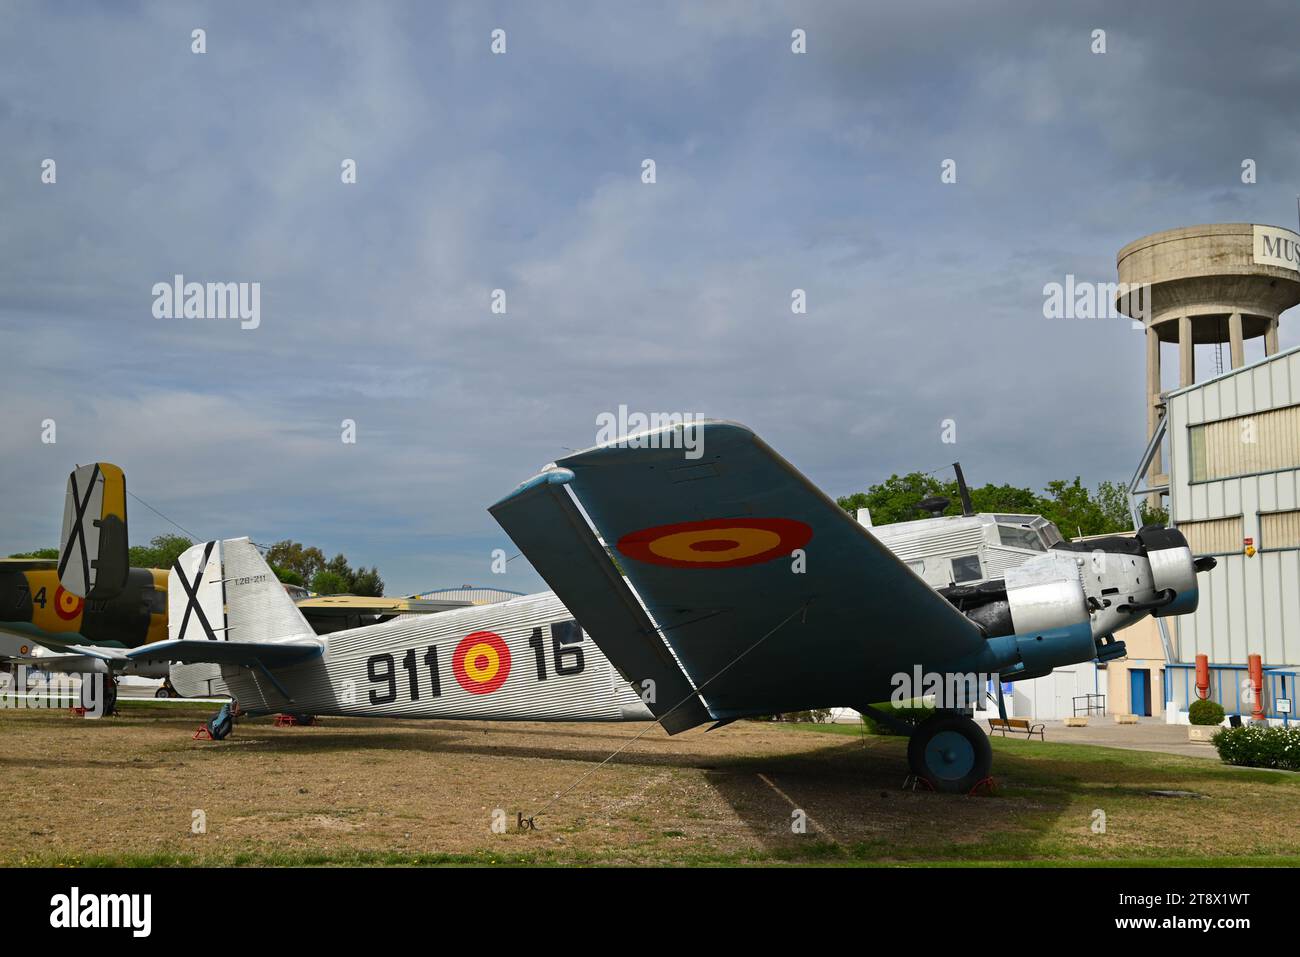 An antiquated aircraft stands in front of a structure alongside other vintage planes, showcasing a unique look of the past Stock Photo